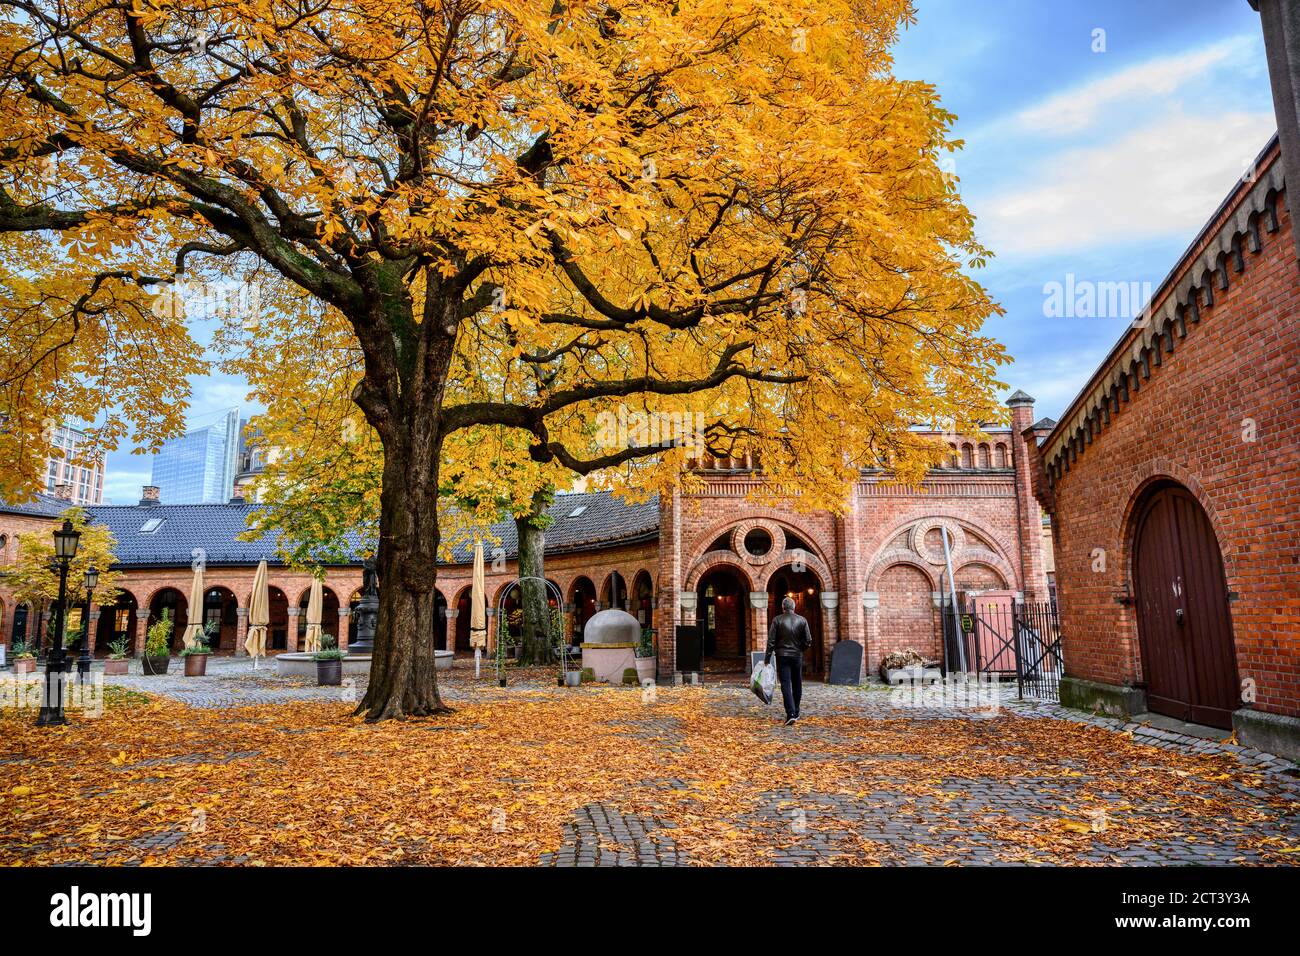 A man walking in the courtyard of the Oslo Cathedral in the autumn The trees in the garden of the leaves turn yellow and orange. Beautiful, in the eve Stock Photo